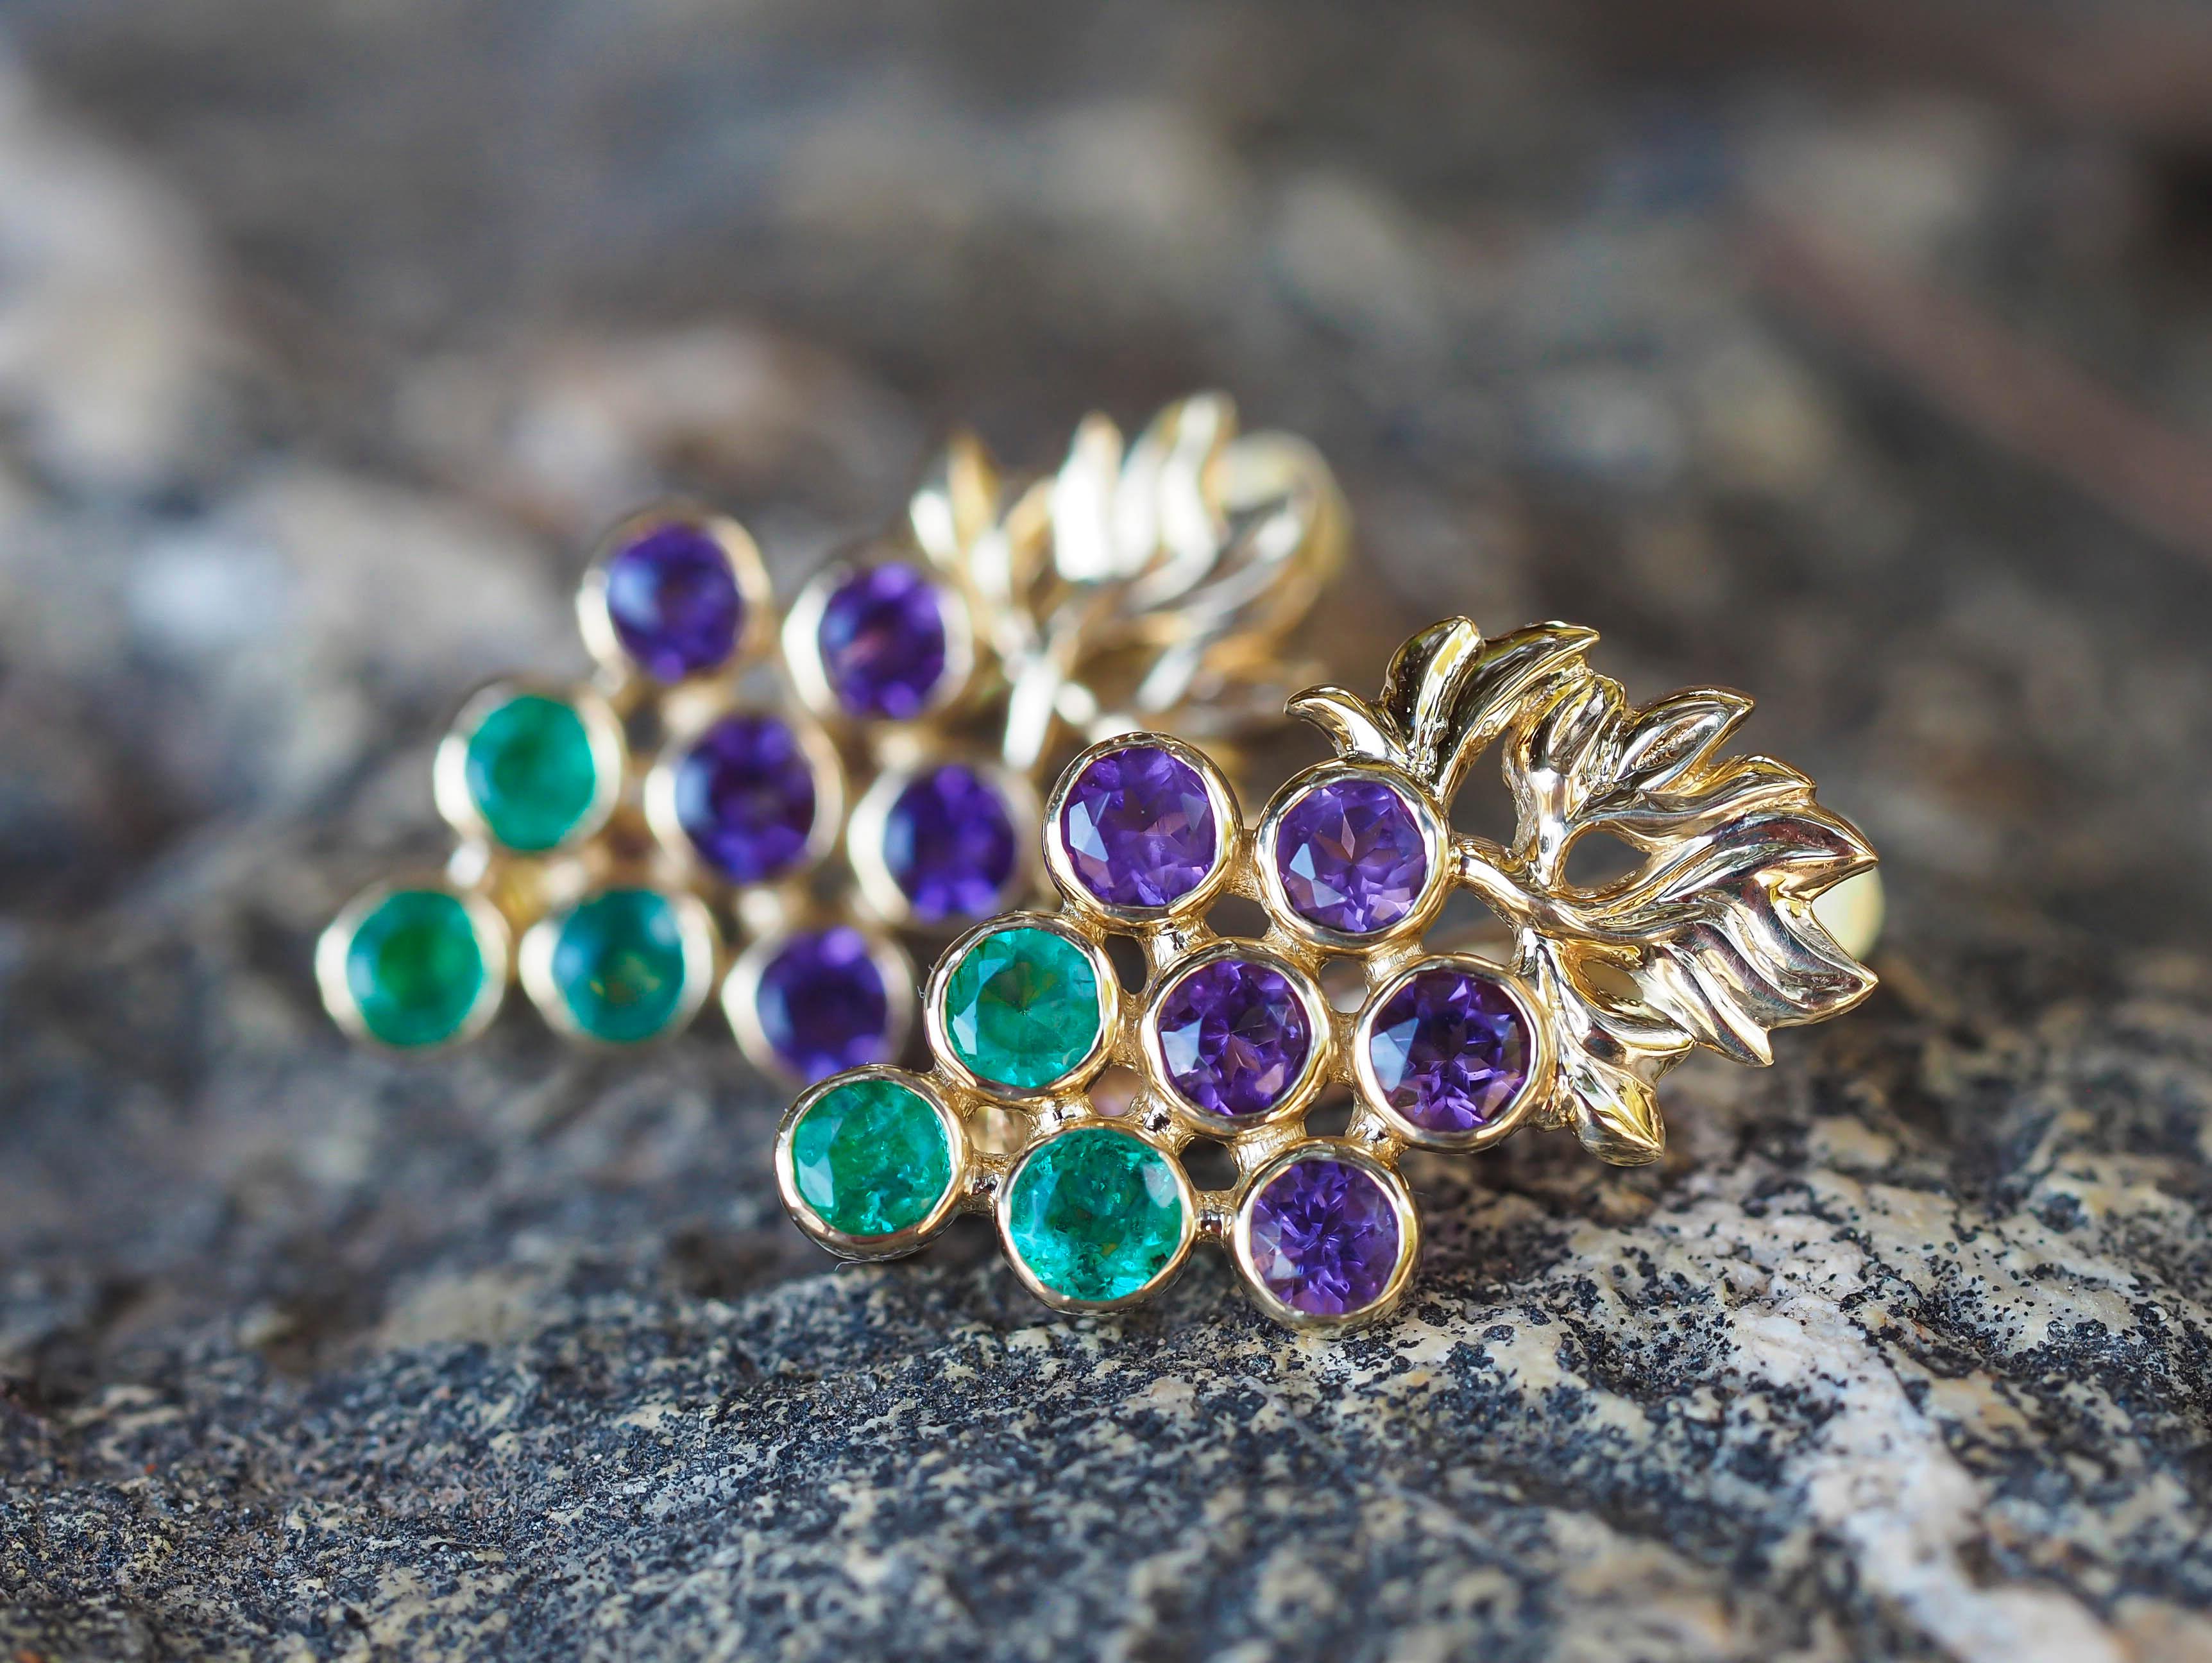 Gold Ring and Earrings with Emeralds and Amethysts 6